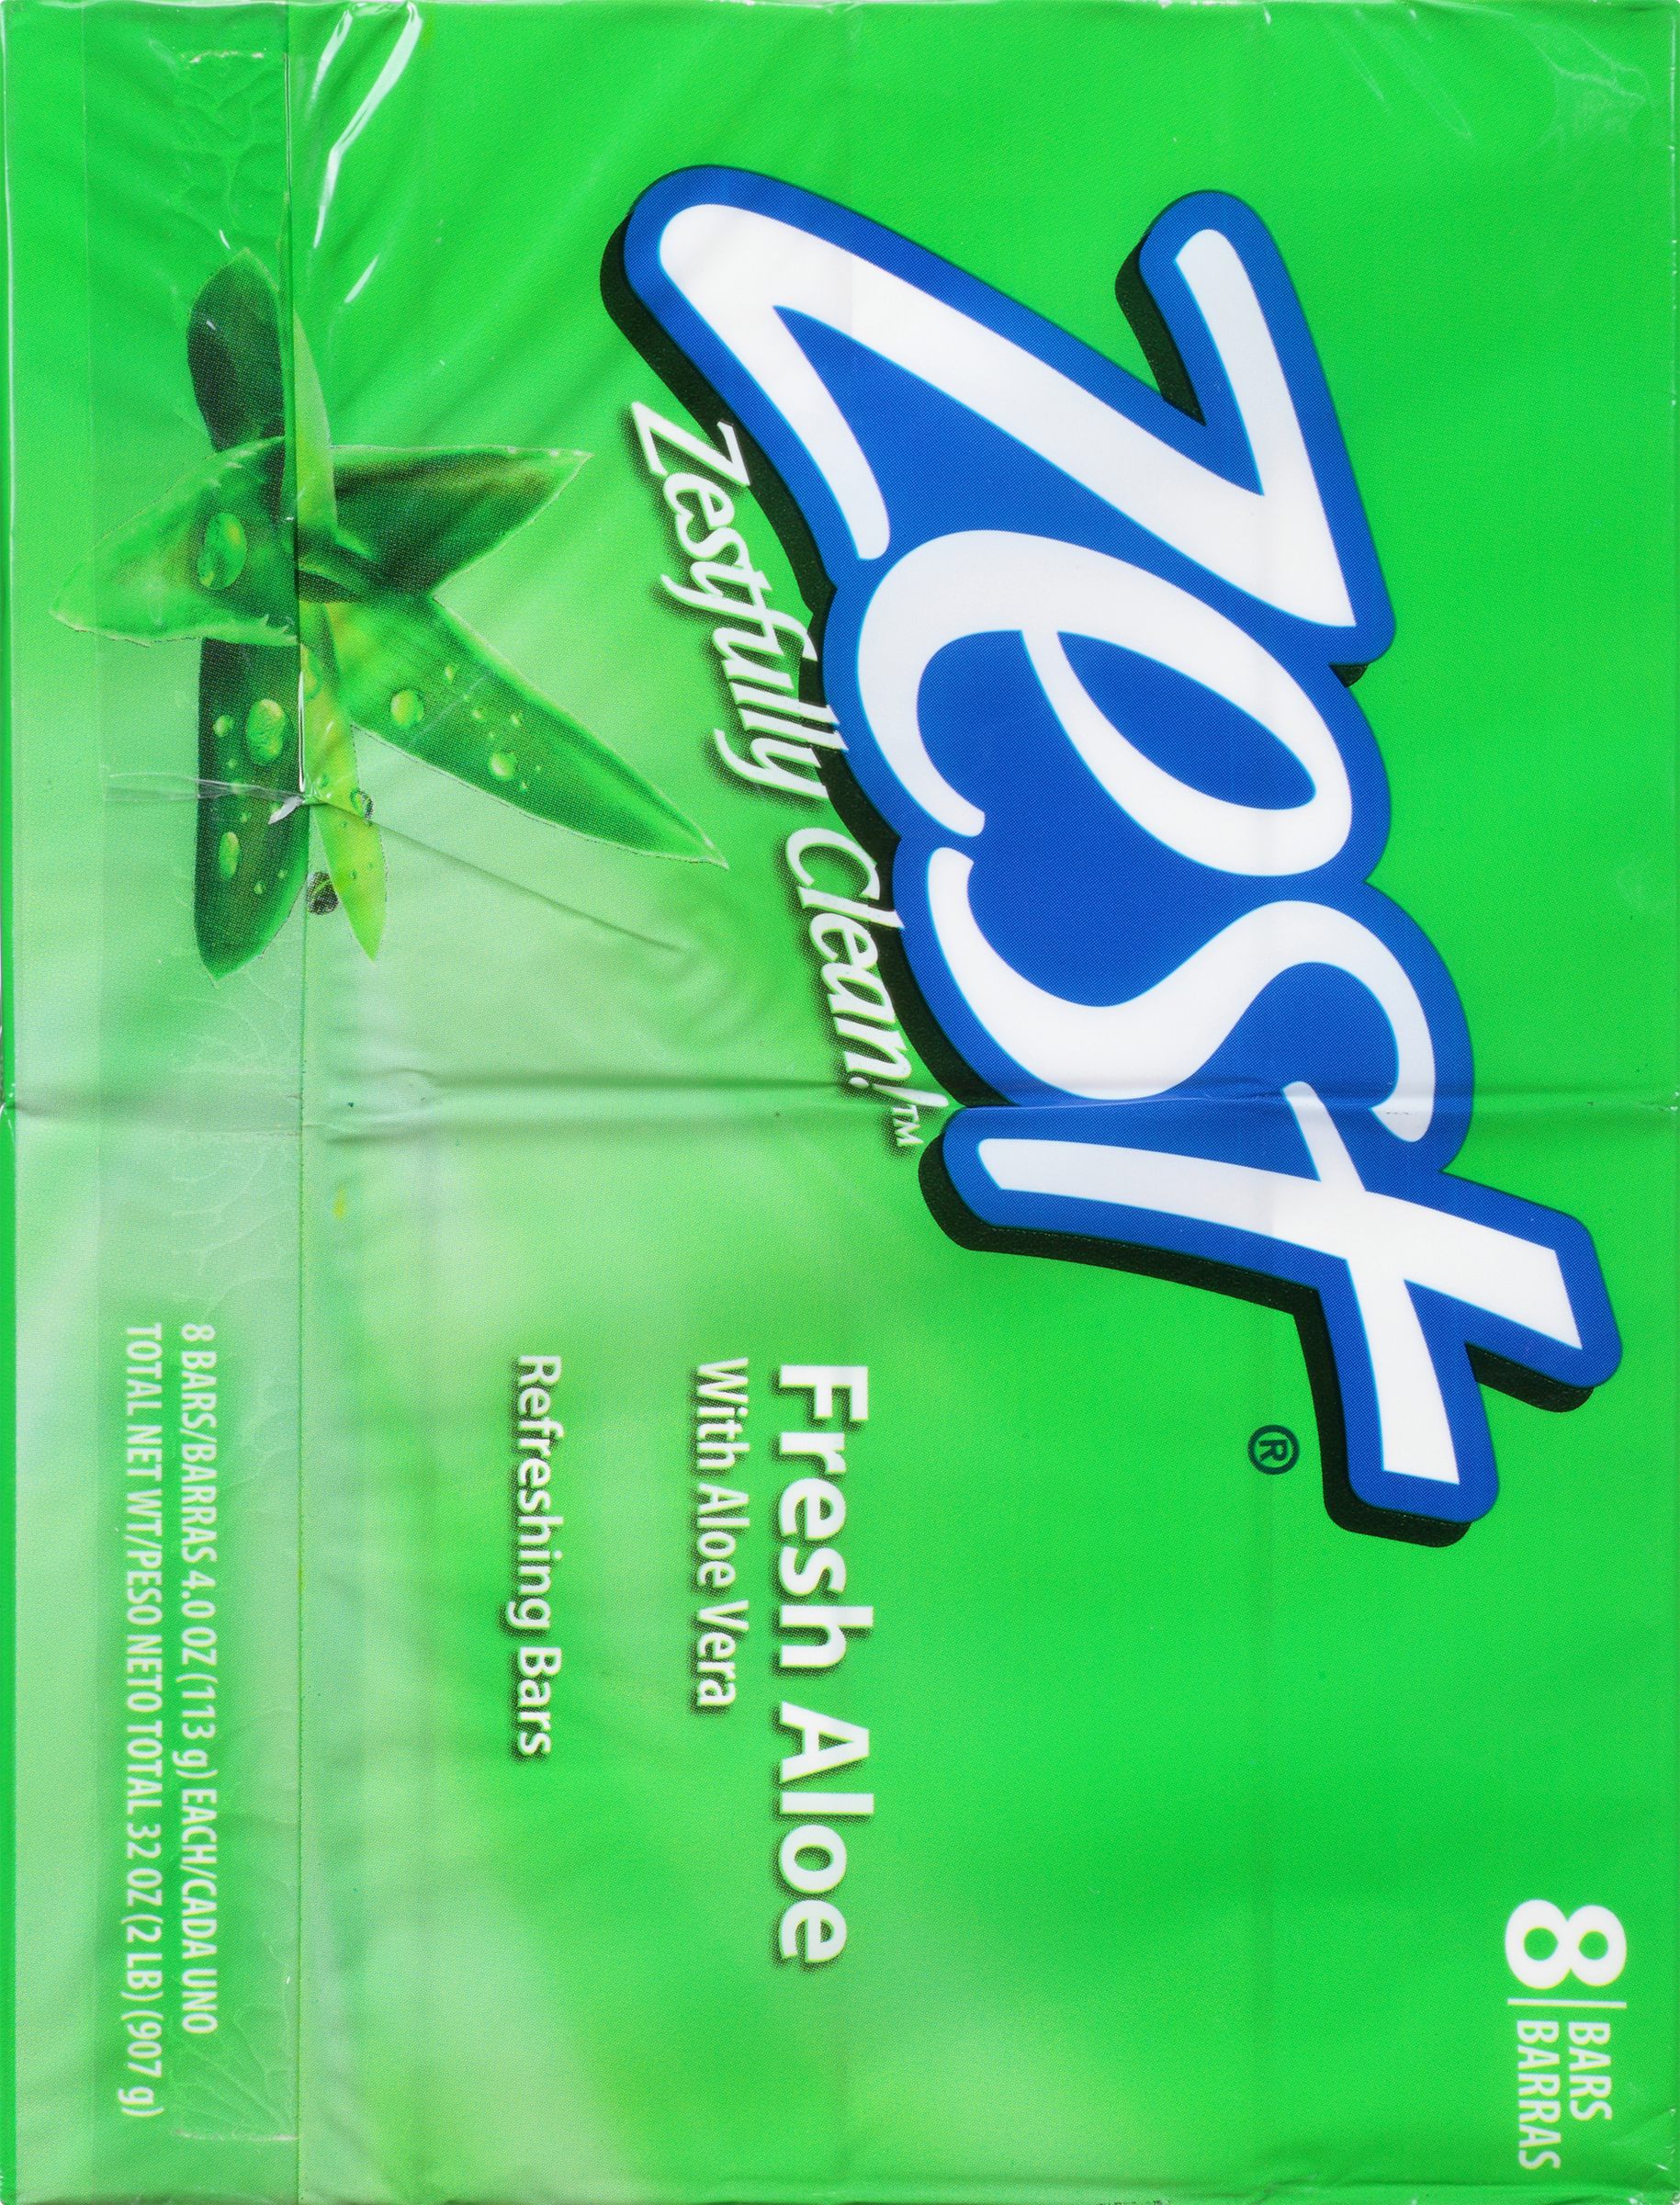 Zest Aloe Water & Pear Hydrating Deodorant Bar Soap, 4 oz., 8-Pack - image 2 of 7